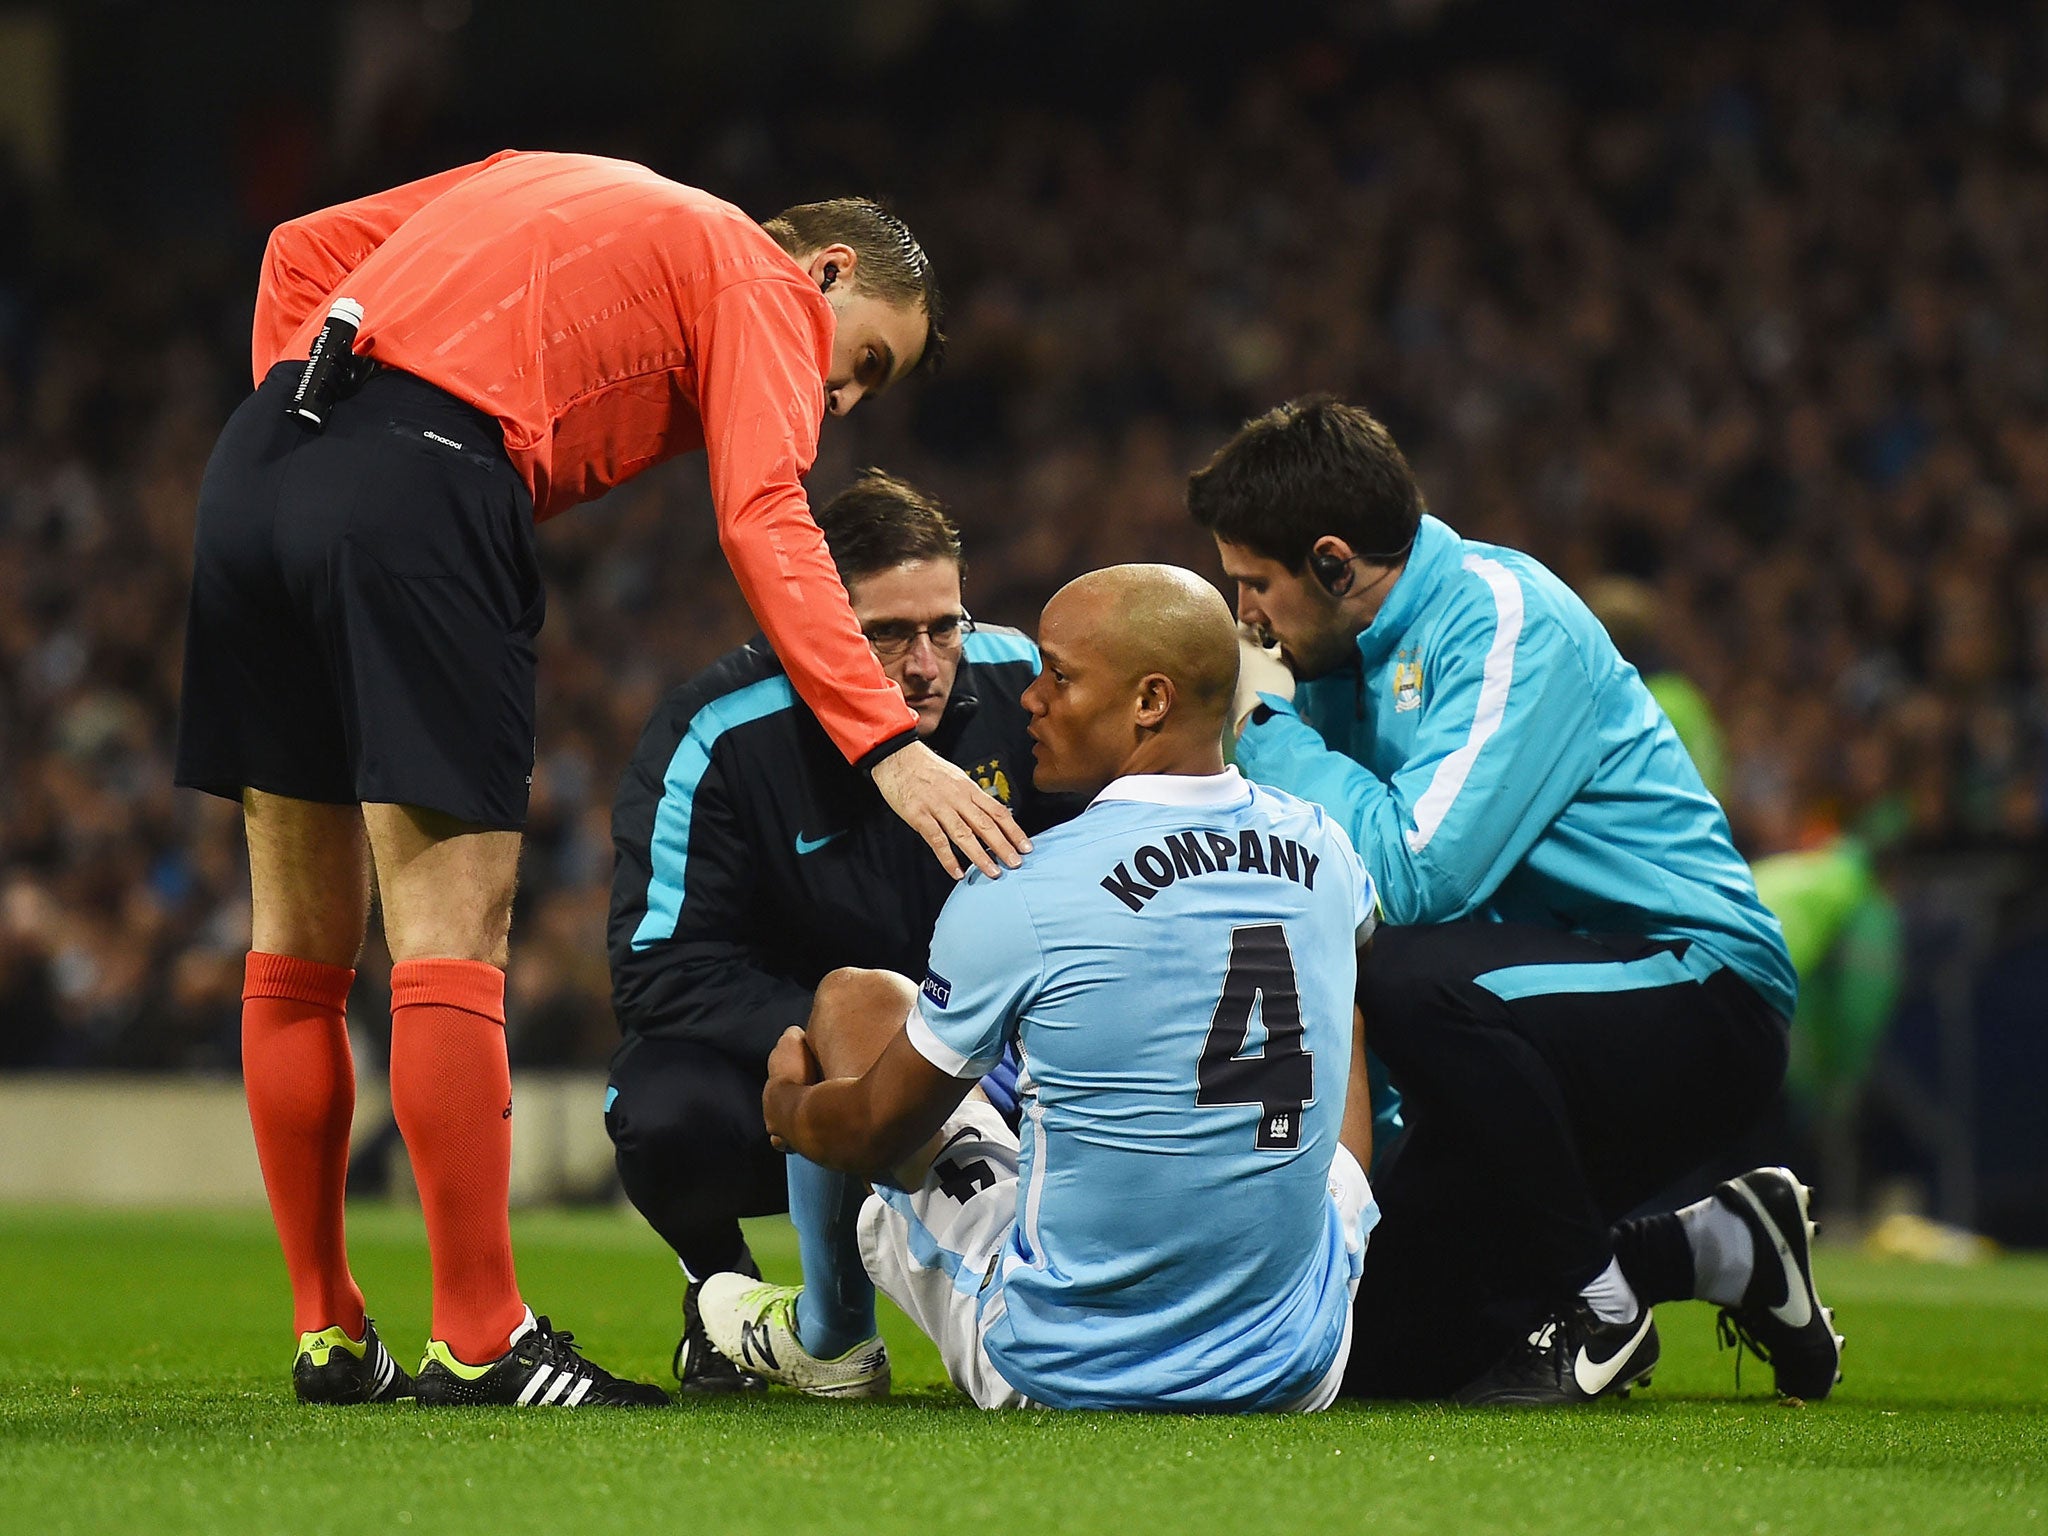 Manchester City's Vincent Kompany is one of the Premier League's most injury-prone players and his club have paid the price - quite literally